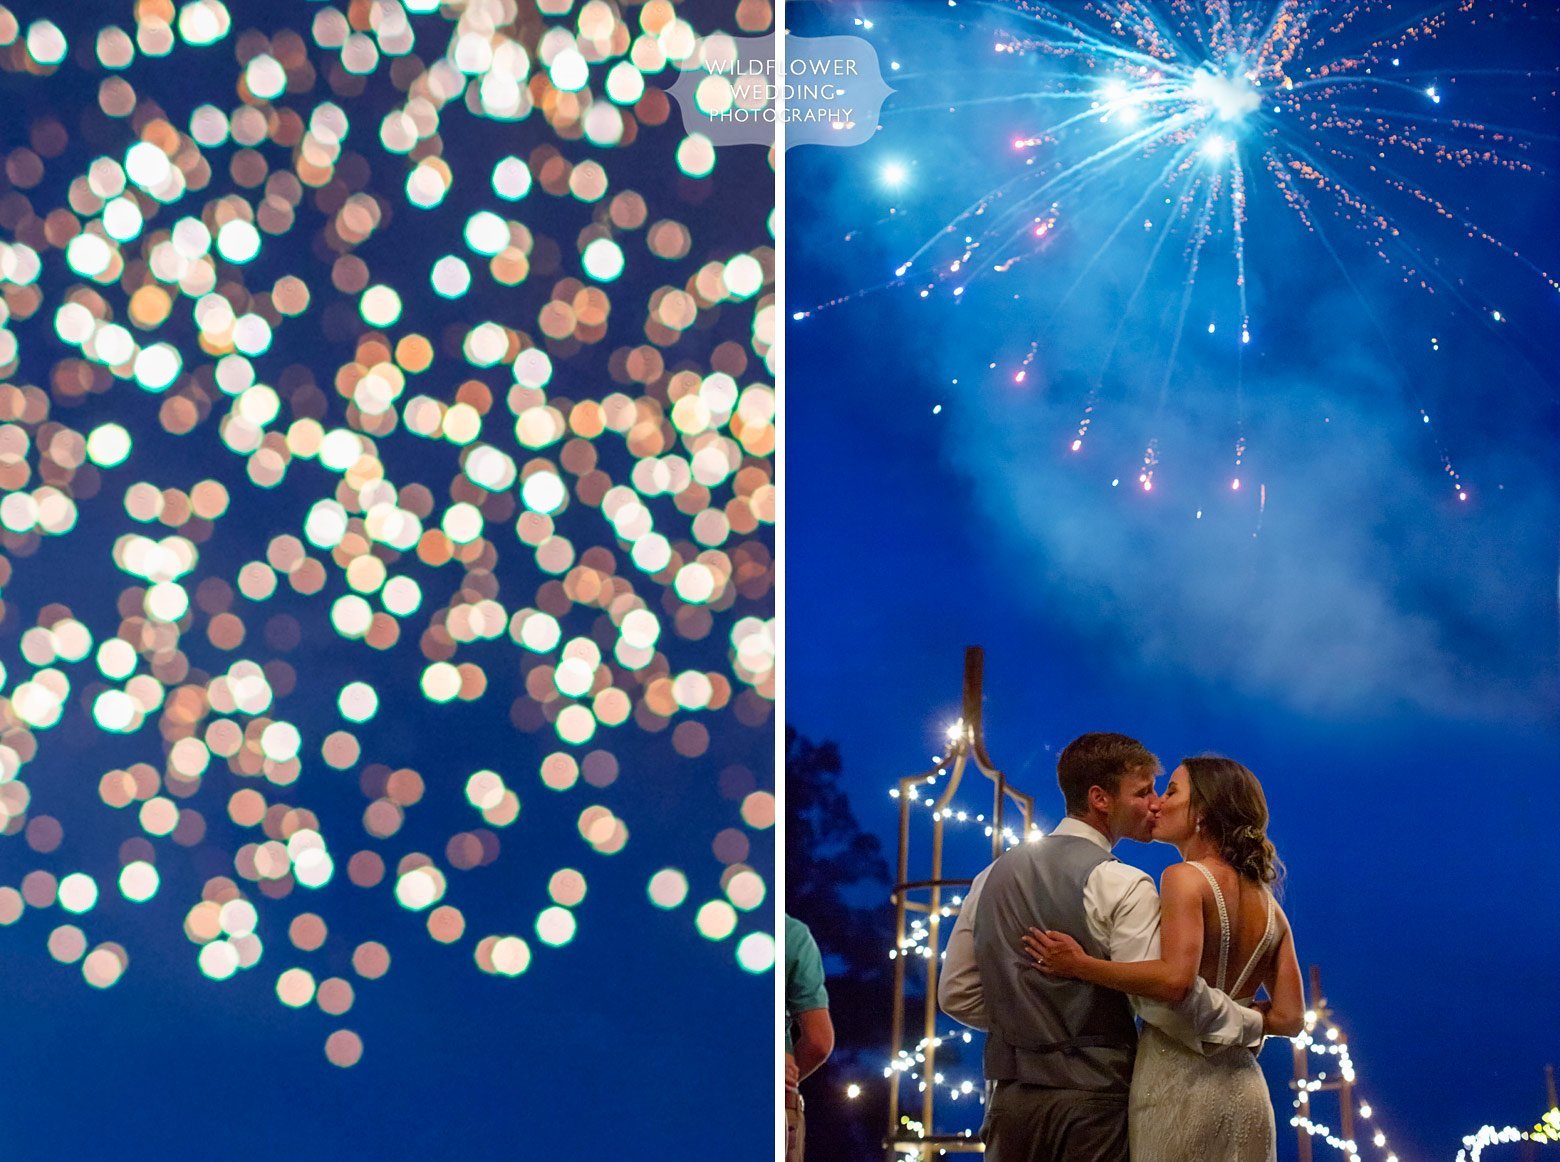 Bride and groom kiss under a deep blue night sky with fireworks.